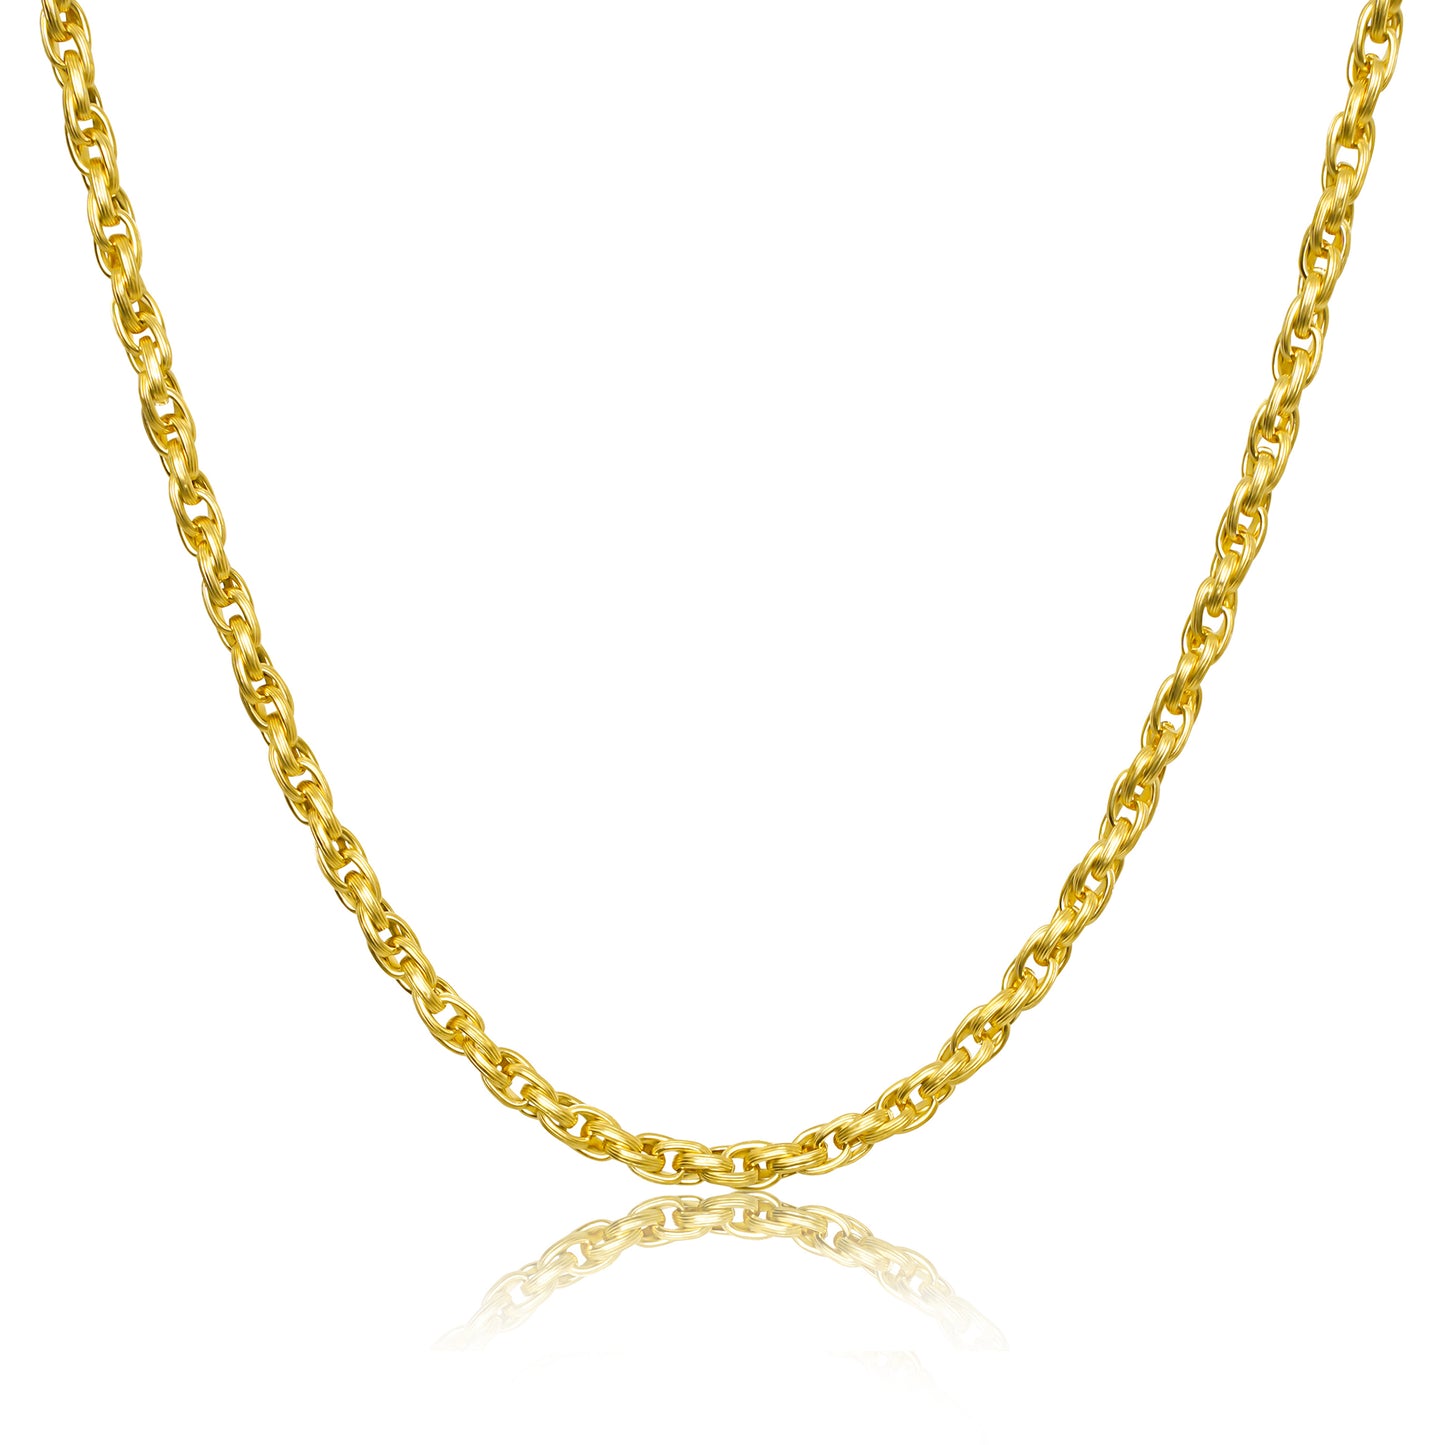 Thick Rope Chain 6mm - Gold